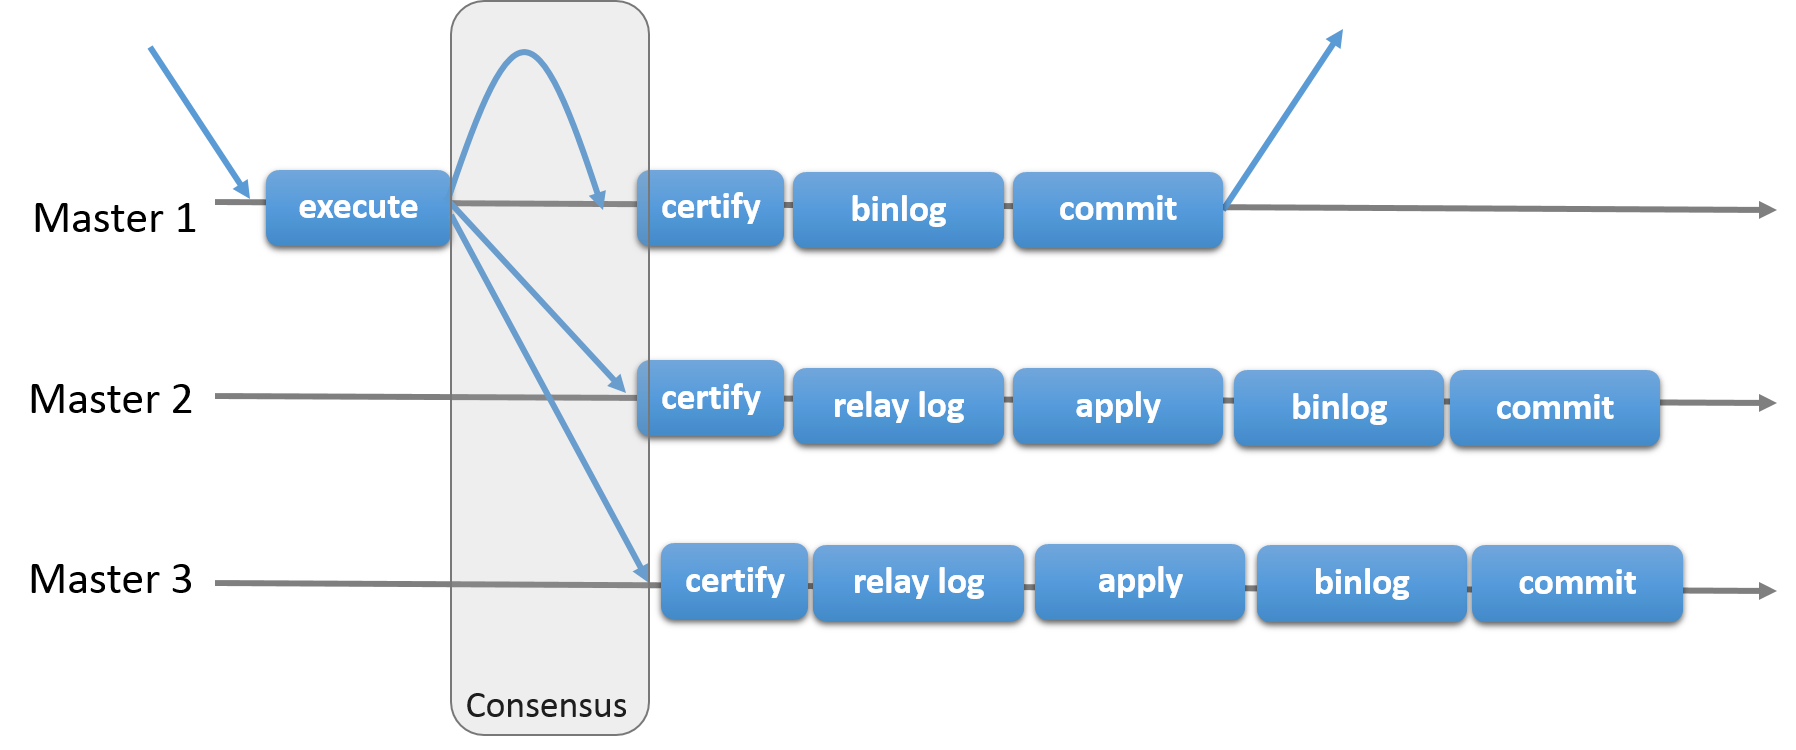 A transaction received by Master 1 is executed. Master 1 then sends a message to the replication group, consisting of itself, Master 2, and Master 3. When all three members have reached consensus, they certify the transaction. Master 1 then writes the transaction to its binary log, commits it, and sends a response to the client application. Masters 2 and 3 write the transaction to their relay logs, then apply it, write it to the binary log, and commit it.